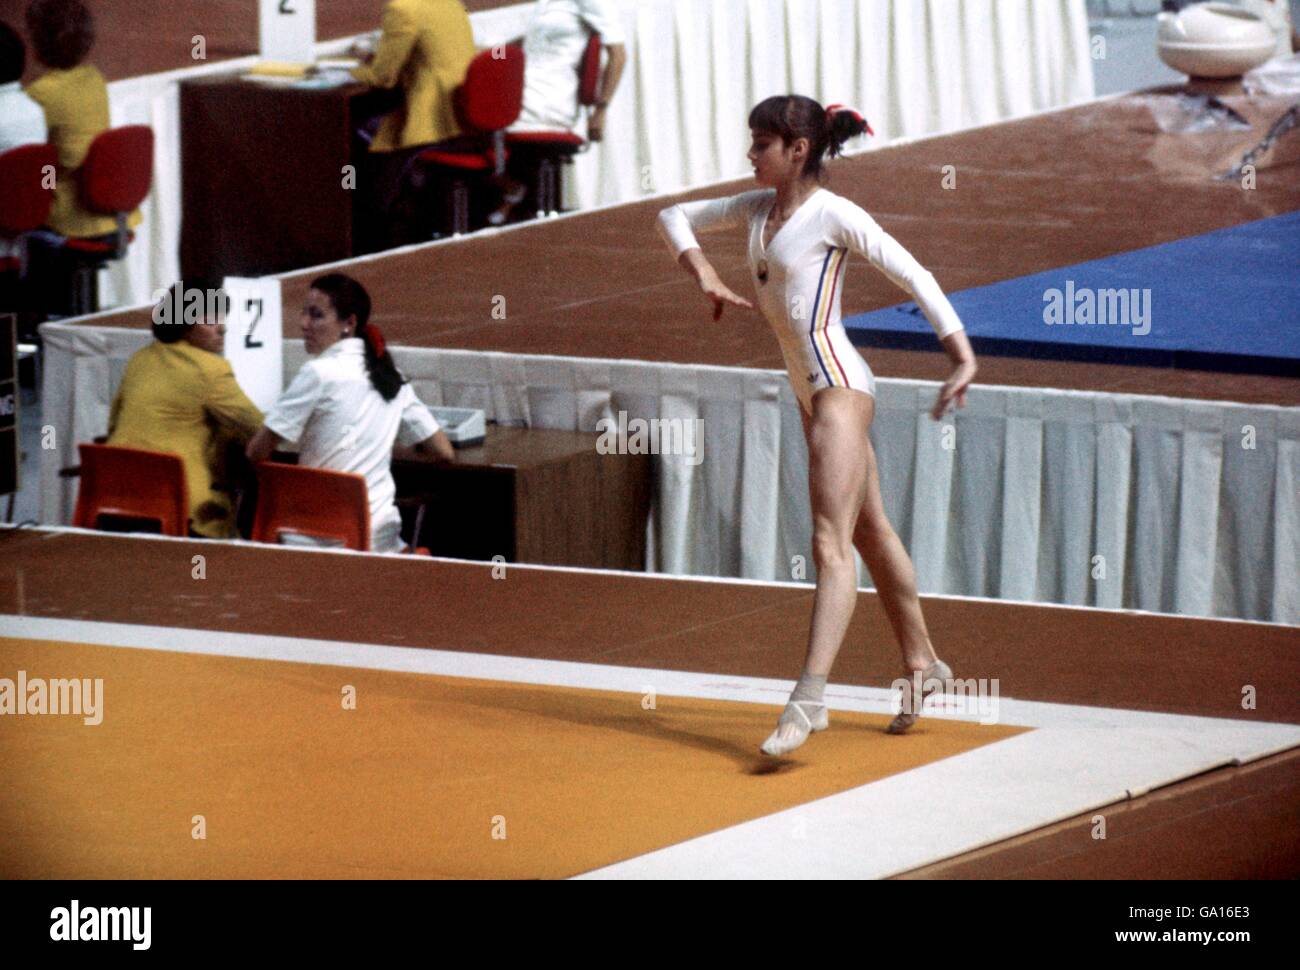 Gymnastics - Montreal Olympic Games - Women's All-Around Final. Romania's Nadia Comaneci performs her floor routine Stock Photo